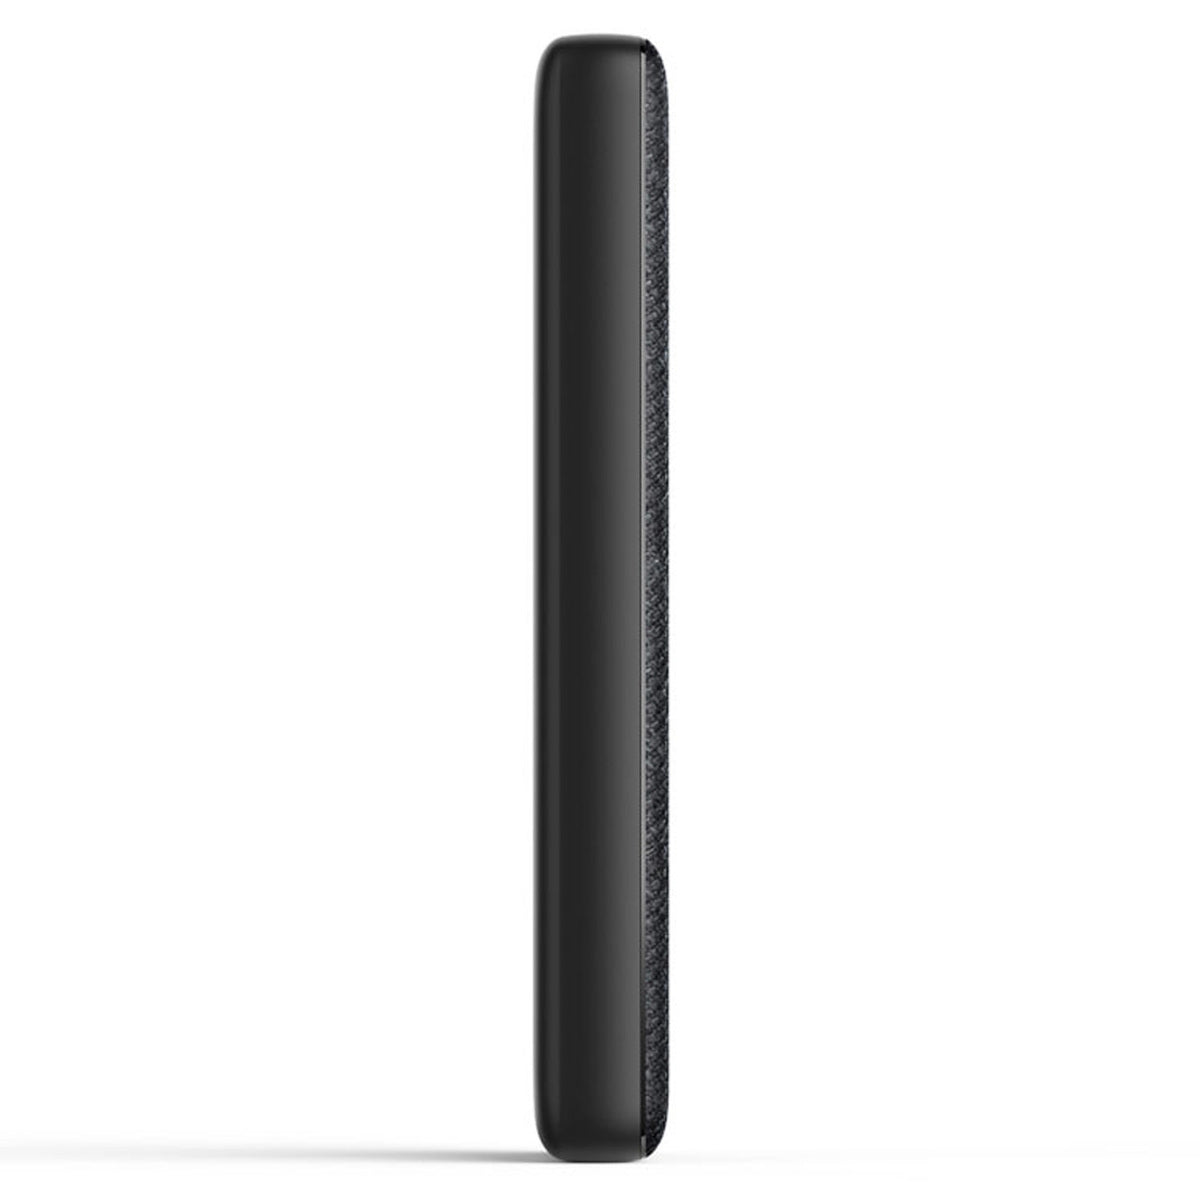 Anker PowerCore Metro Essential Power Bank 20000mAh PD A1287H12 in black color